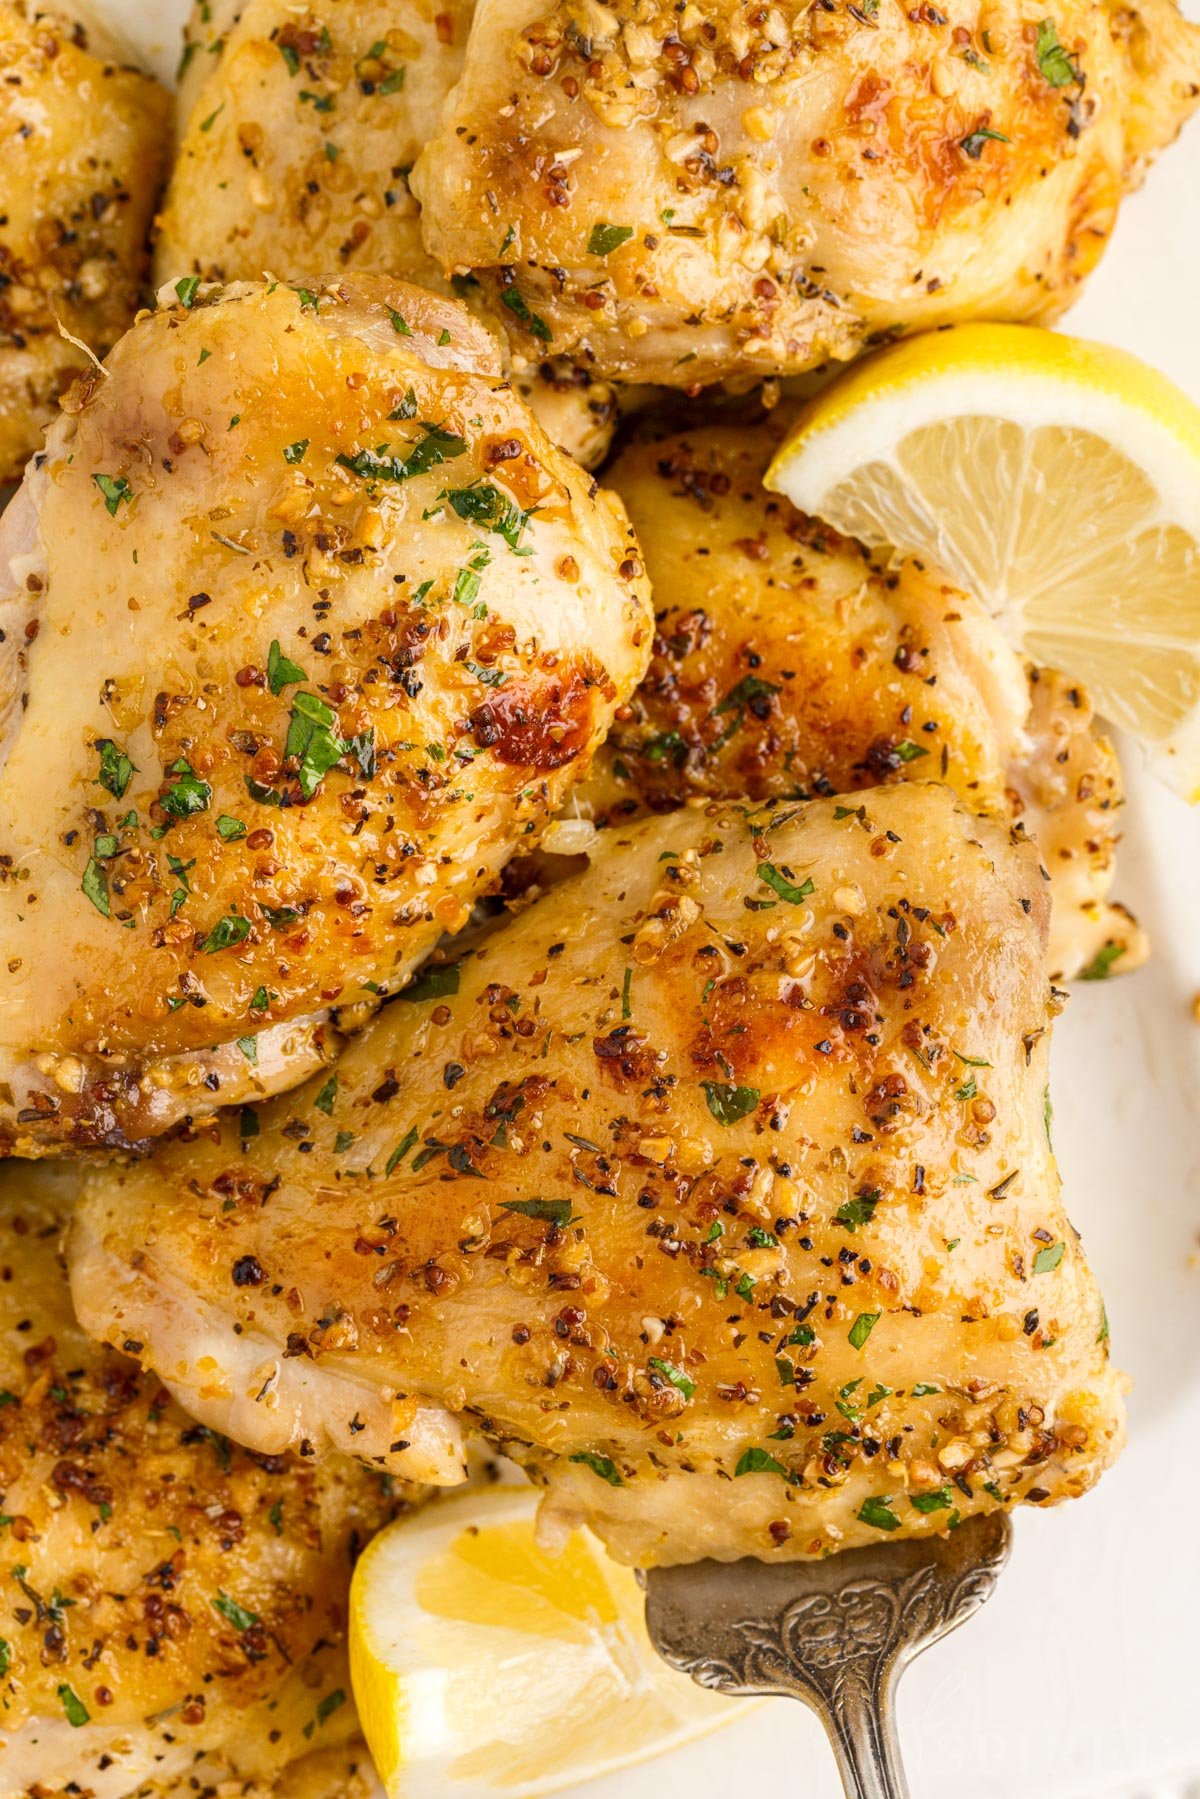 Baked Chicken Thighs on a plate with lemon slices.